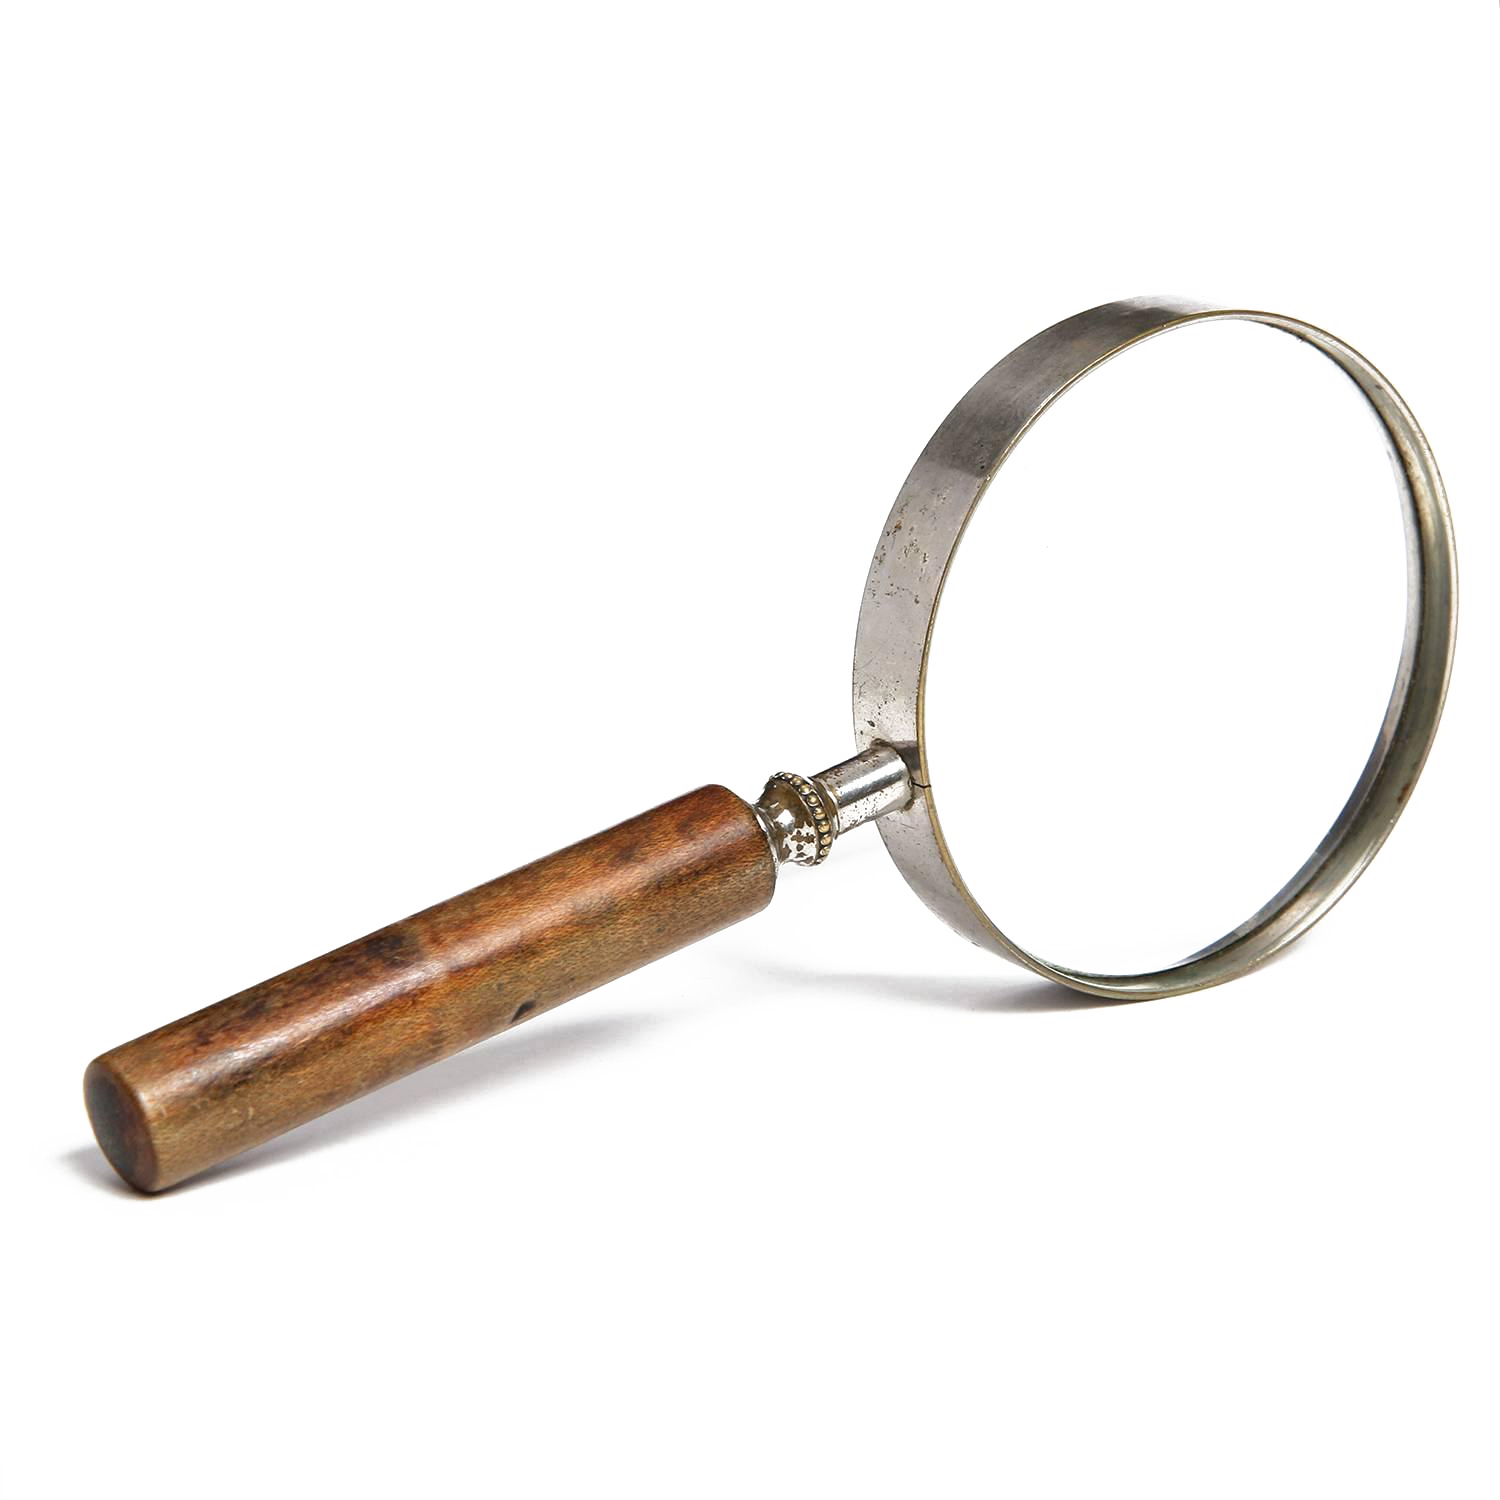 A Magnifying Glass With A Wooden Handle